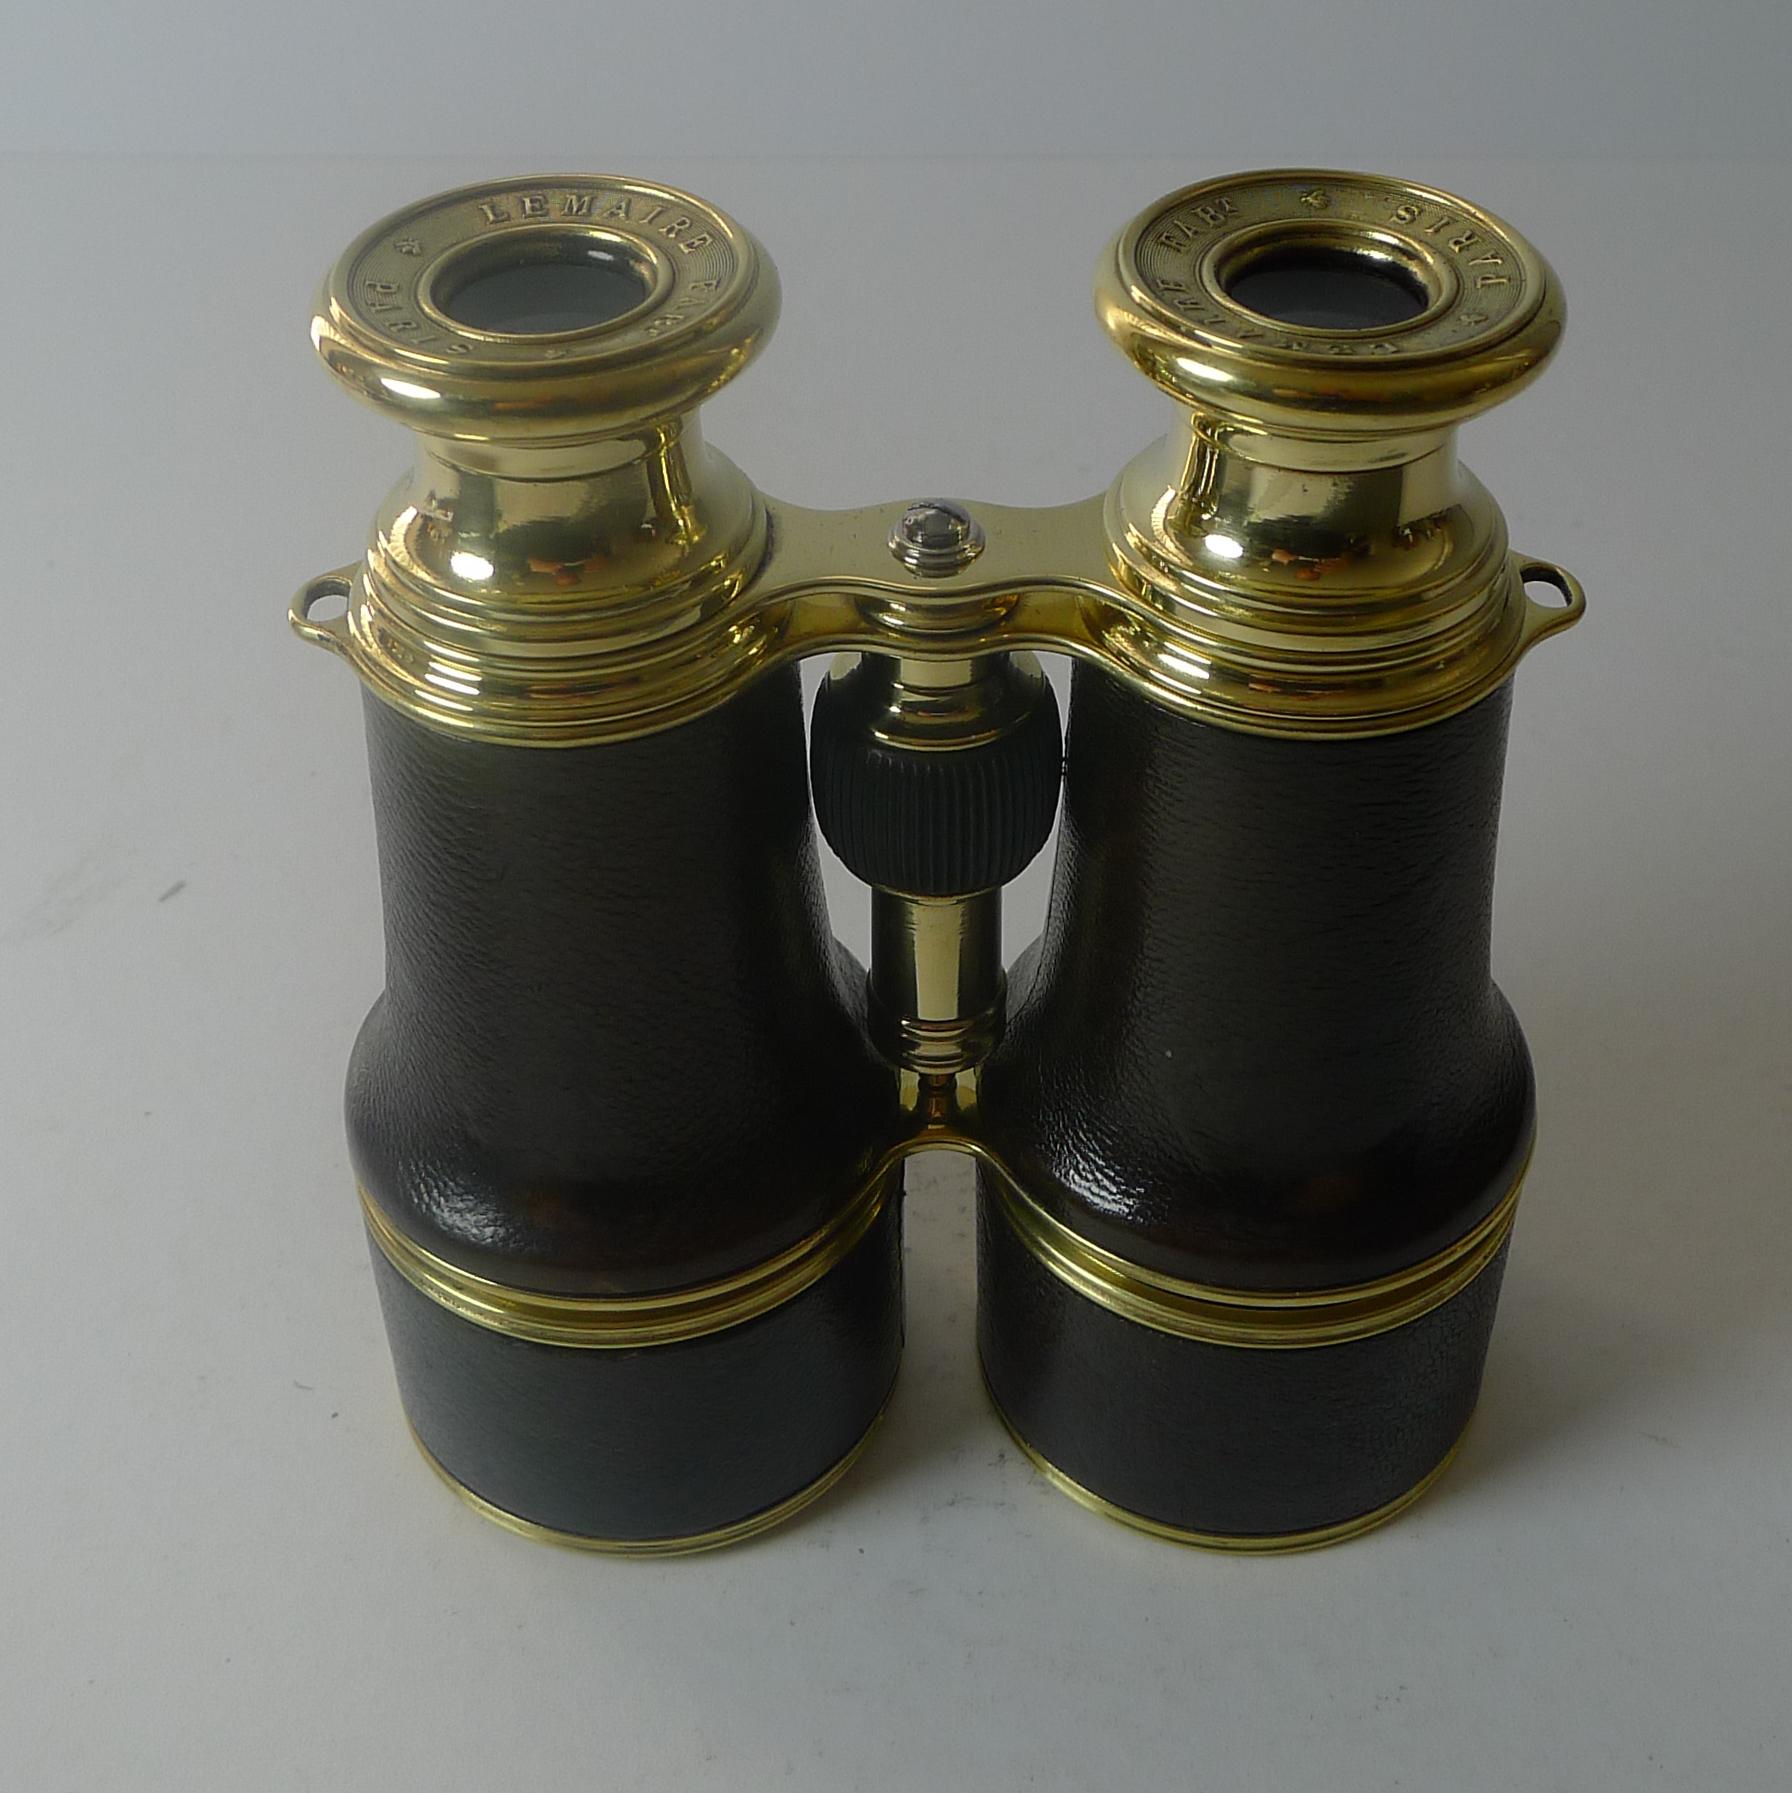 Early 20th Century Pair WW1 Binoculars - British Officer's Issue by LeMaire, Paris